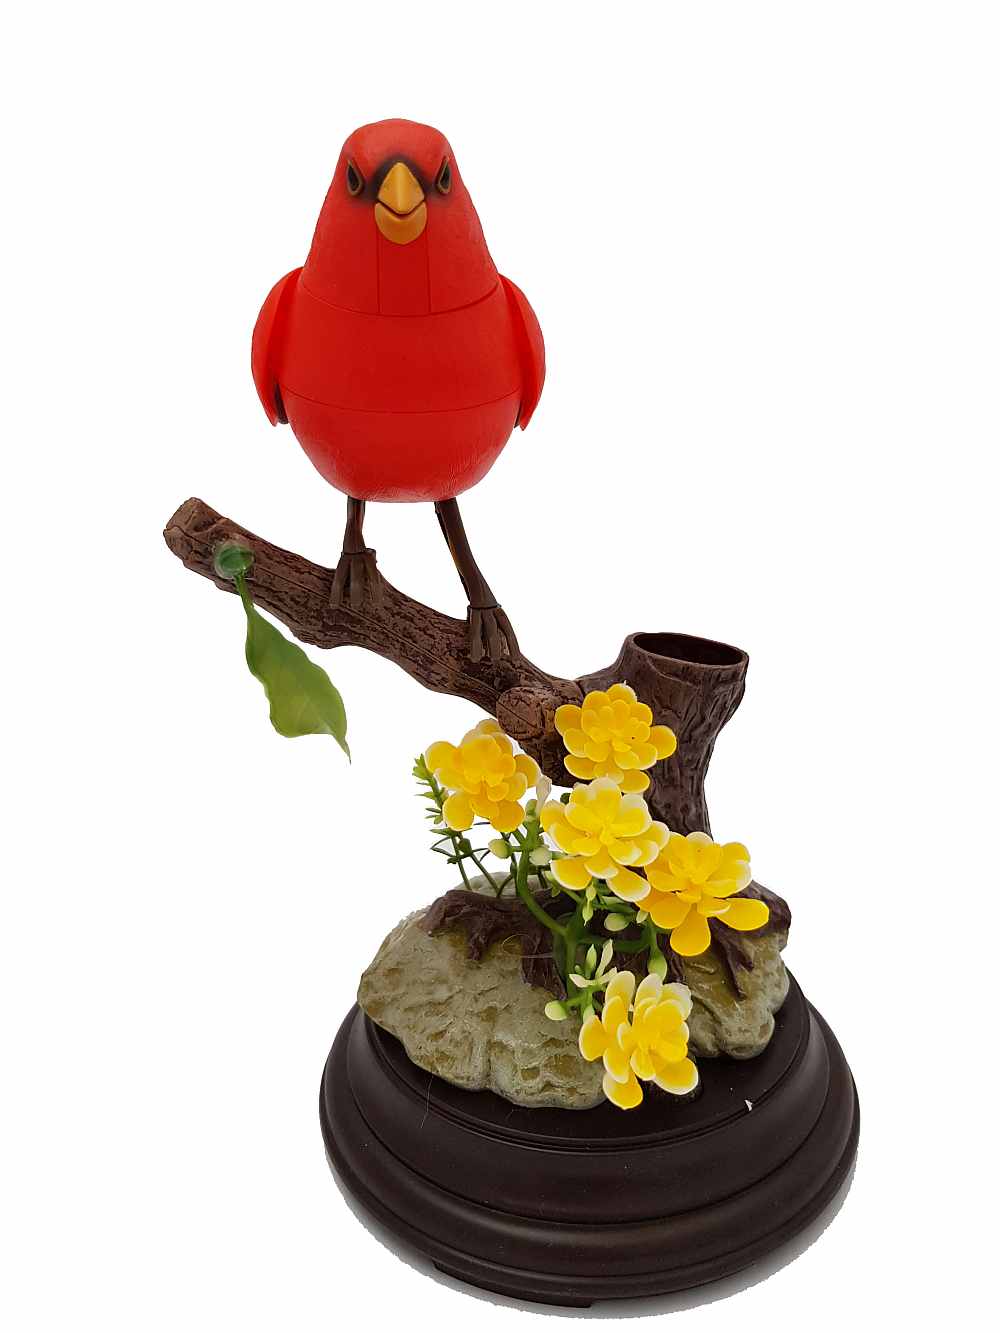 Sound Control Bird Sparrow The Ensemble Bird Beautiful Birds Gifts Toy Birds for All Ages